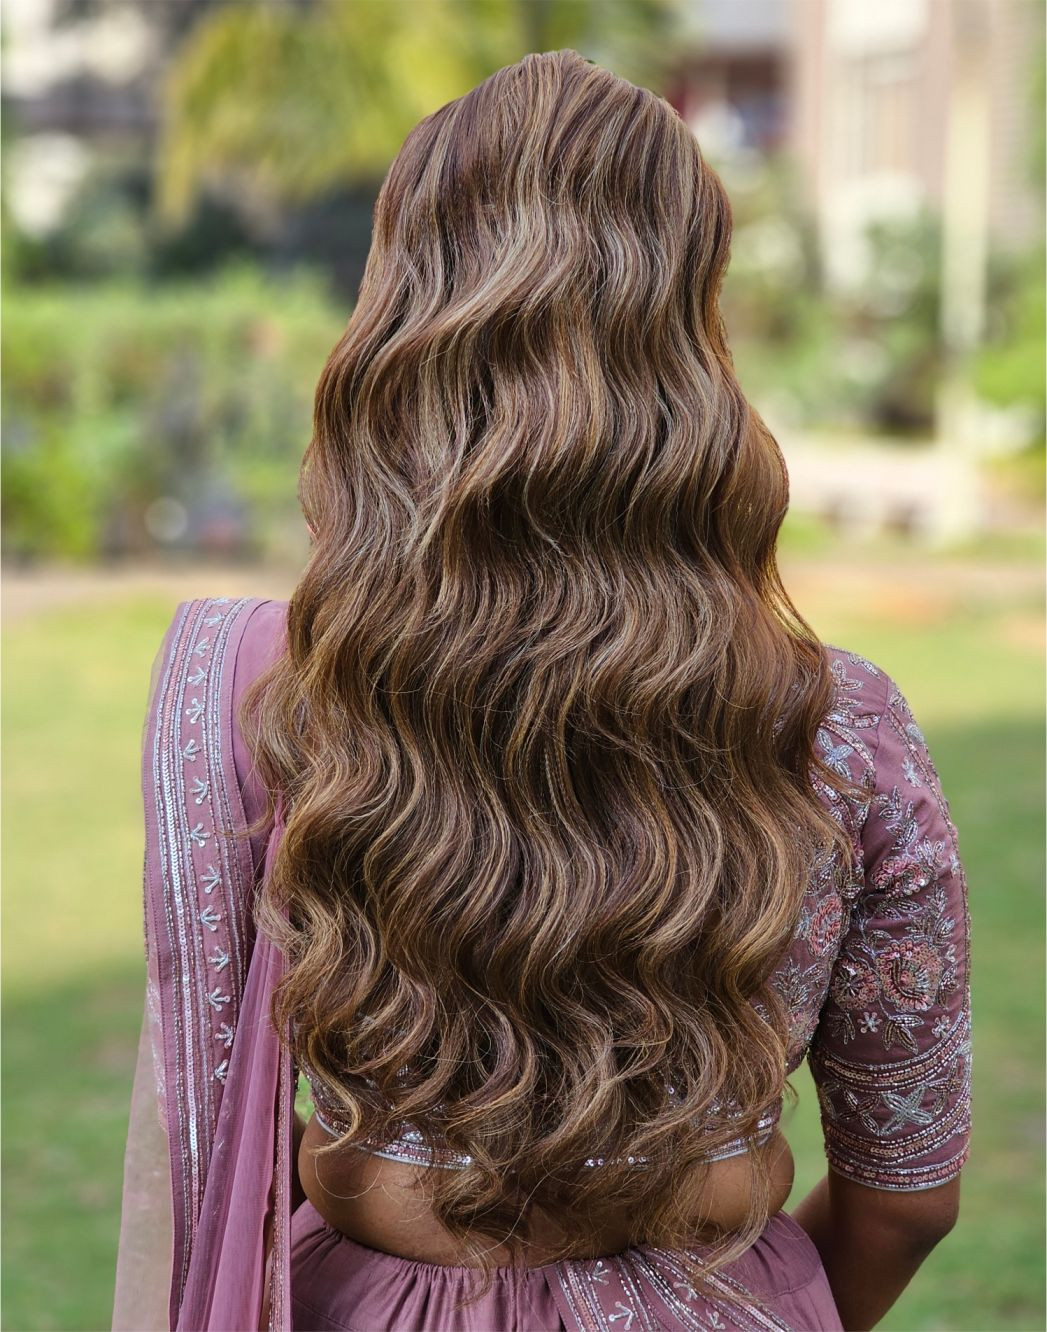 Soft Wavy Curls With Open Hair Style Look - Rl0043